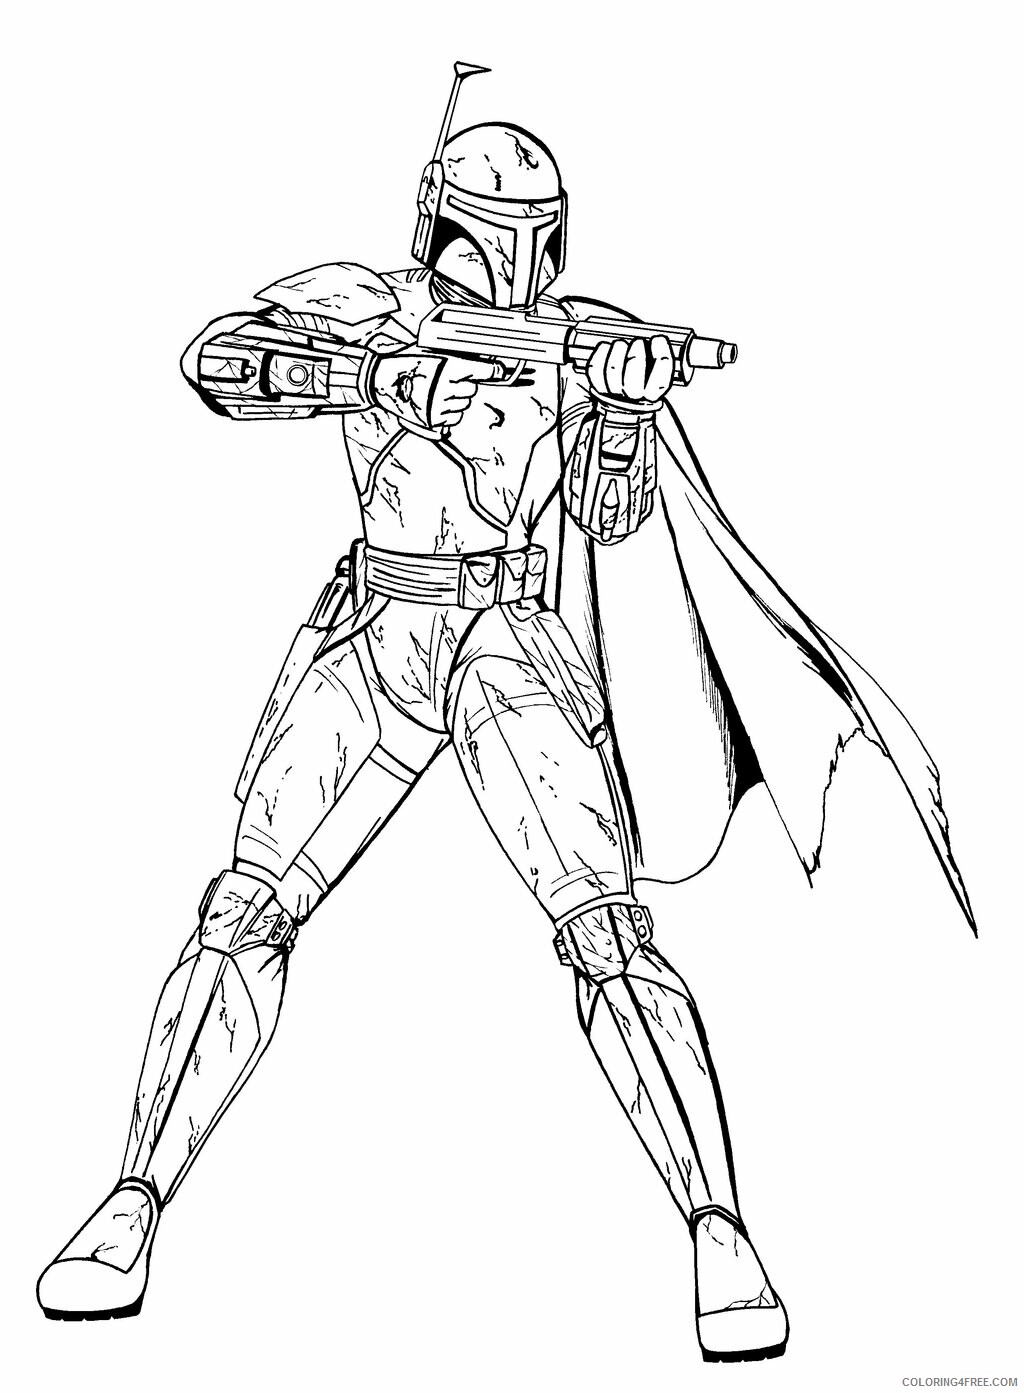 Star Wars Coloring Pages TV Film Star Wars For Kids Printable 2020 08027 Coloring4free